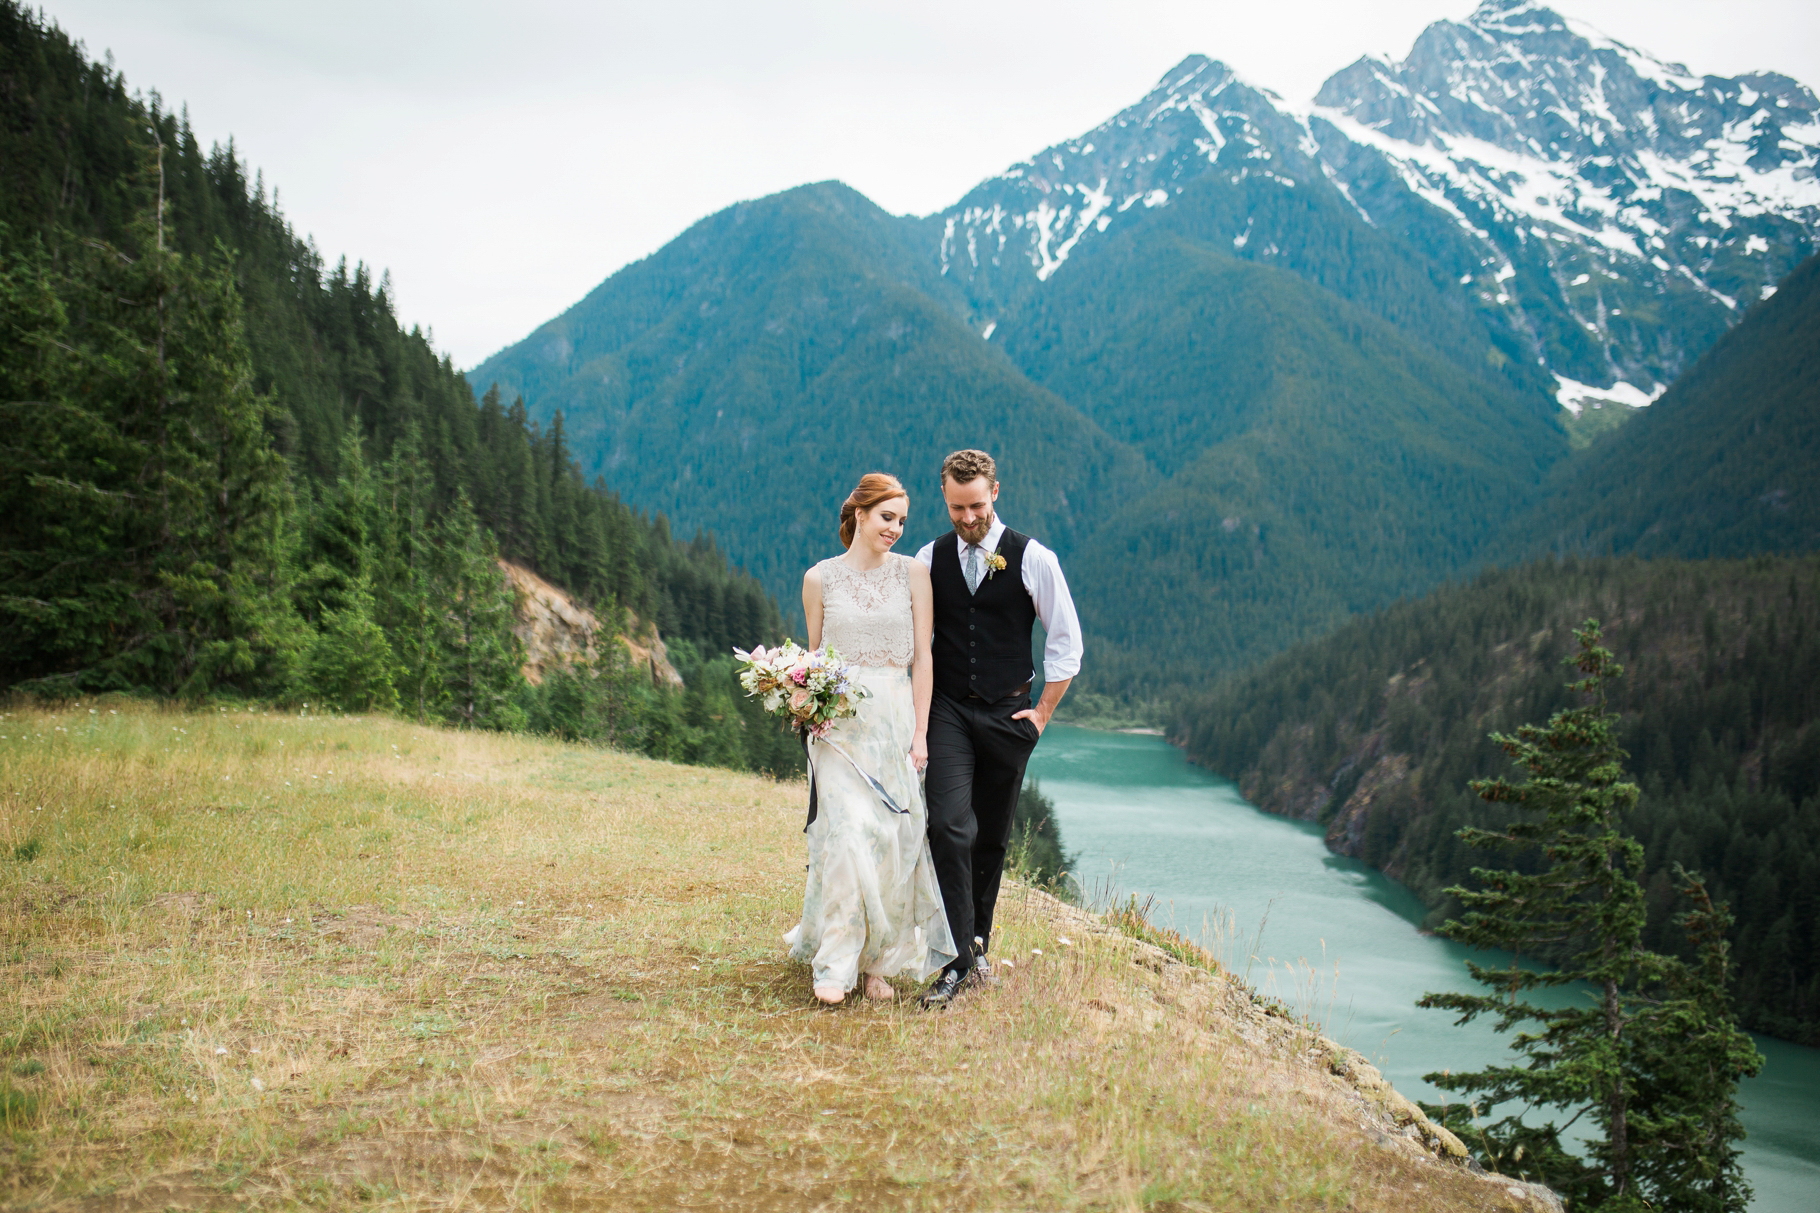 20-Eloping-in-Seattle-Wedding-Photographer-PNW-Locations-Diablo-Lake-North-Cascades